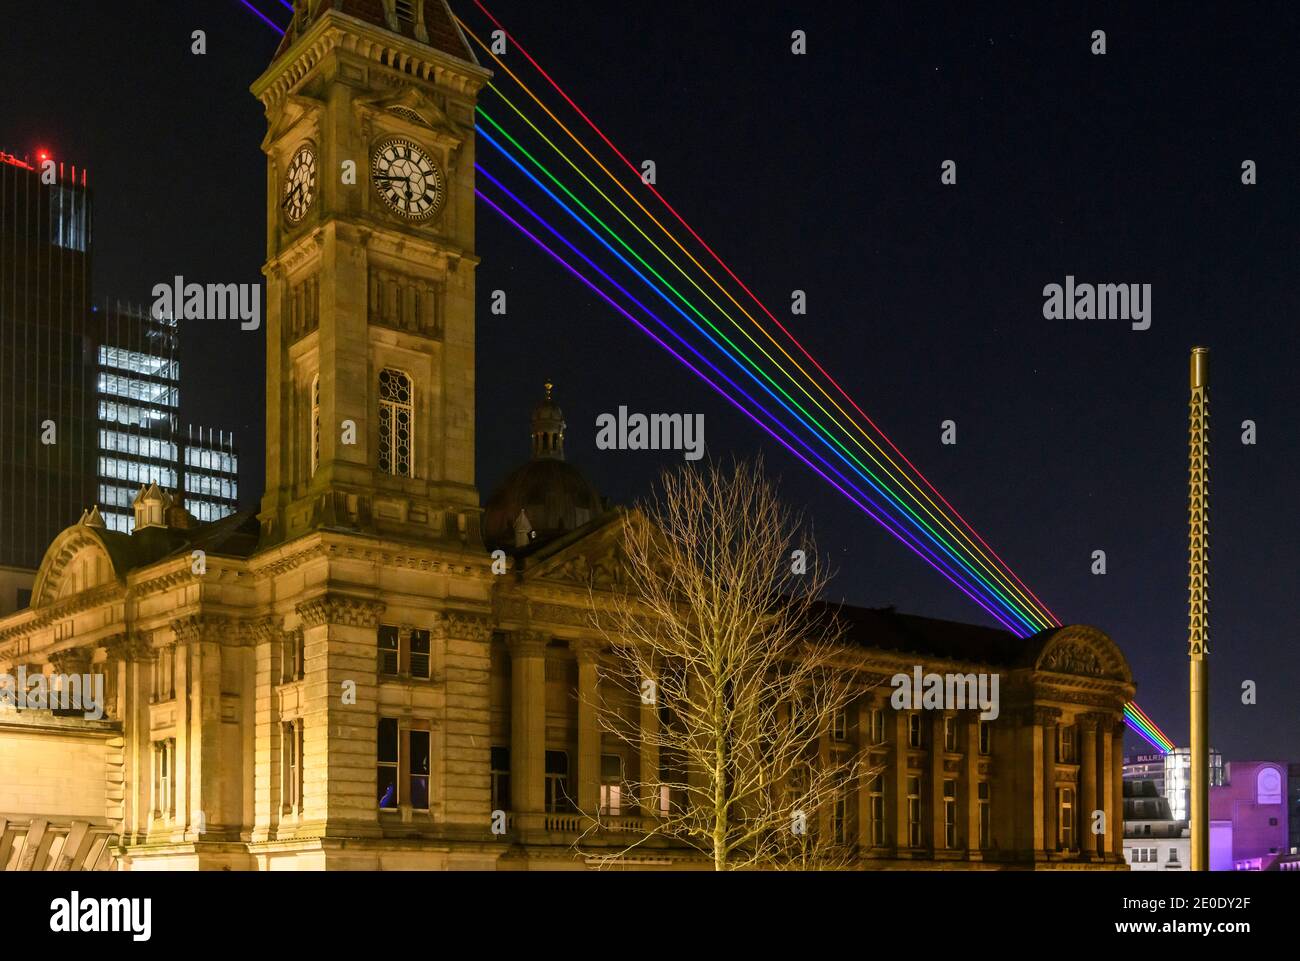 Birmingham, UK. 31 December 2020. Global Rainbow C an art installation by international artist Yvette Mattern - was beamed Northwest from the city's iconic Rotunda building this evening, marking a message of hope and peace for the New Year. The picture shows the view across the city from the top of the Rotunda. Global Rainbow beams seven rays of laser light (Red, Orange, Yellow, Green, Blue, Indigo and Violet) representing the colour spectrum of a natural rainbow and will be shone northwest out the city over the New Year period. Credit: Simon Hadley/Alamy Live News Stock Photo